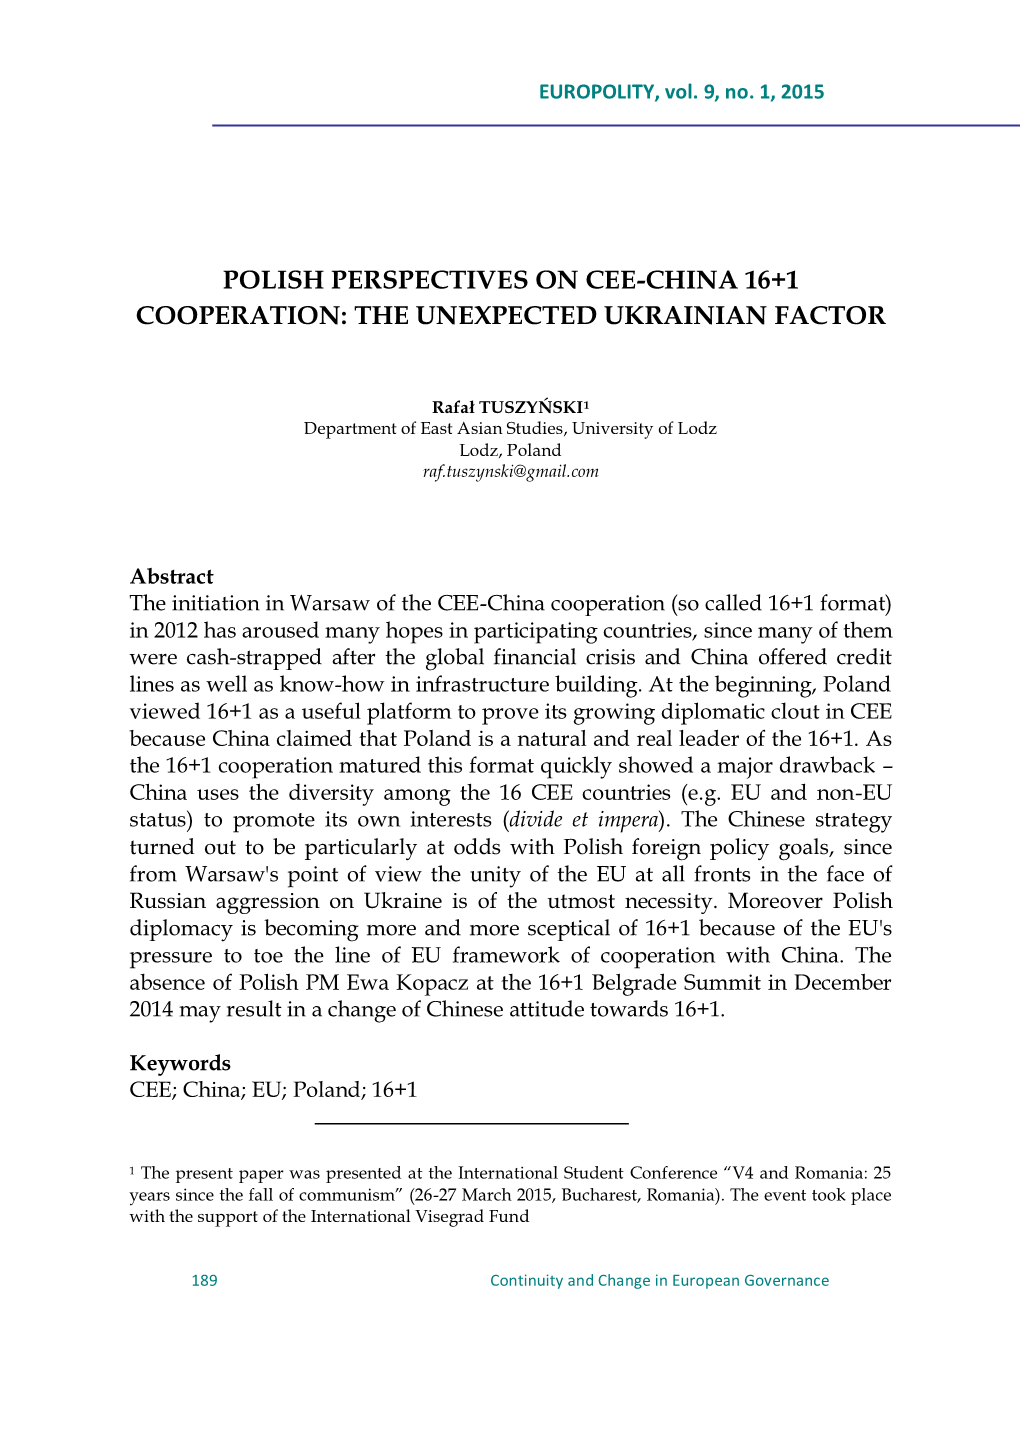 Polish Perspectives on Cee-China 16+1 Cooperation: the Unexpected Ukrainian Factor